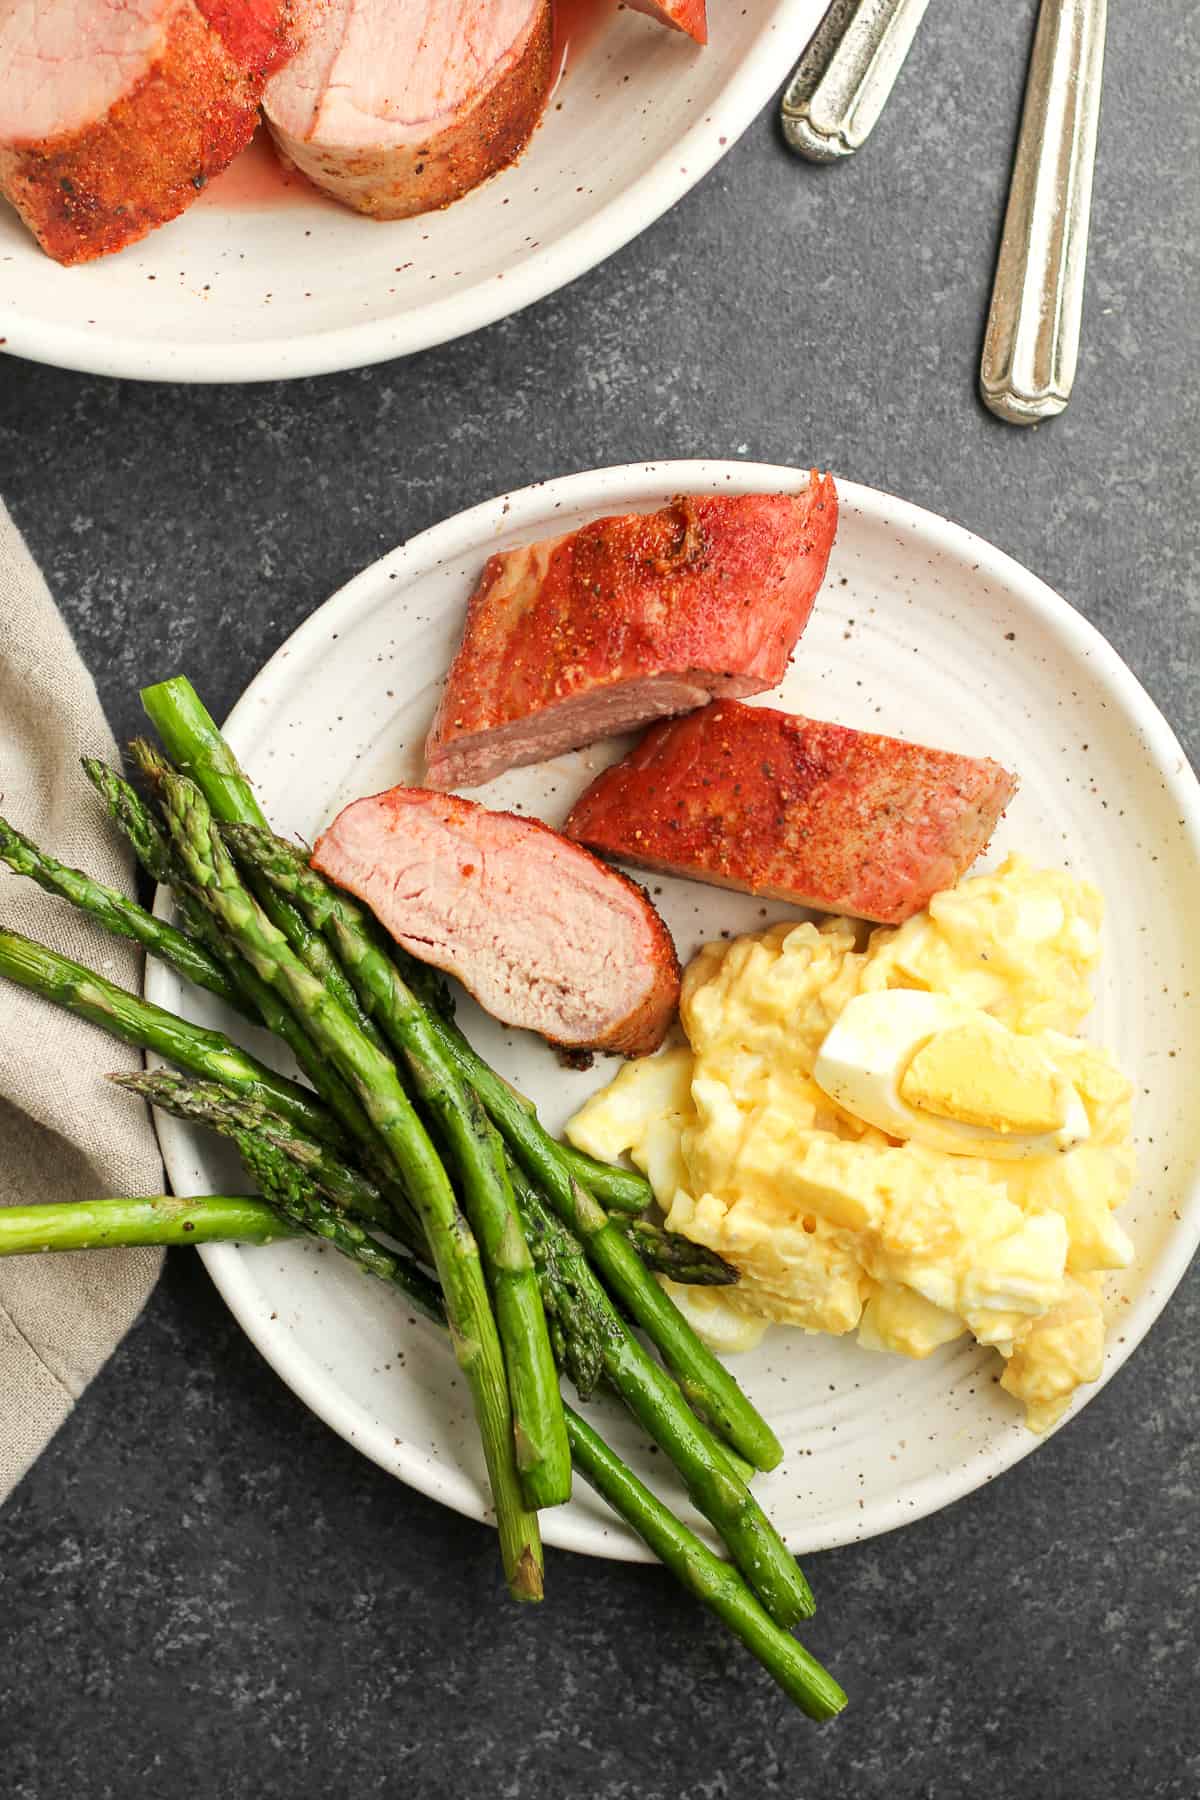 Overhead view of a plate of smoked pork tenderloin, potato salad, and grilled asparagus.